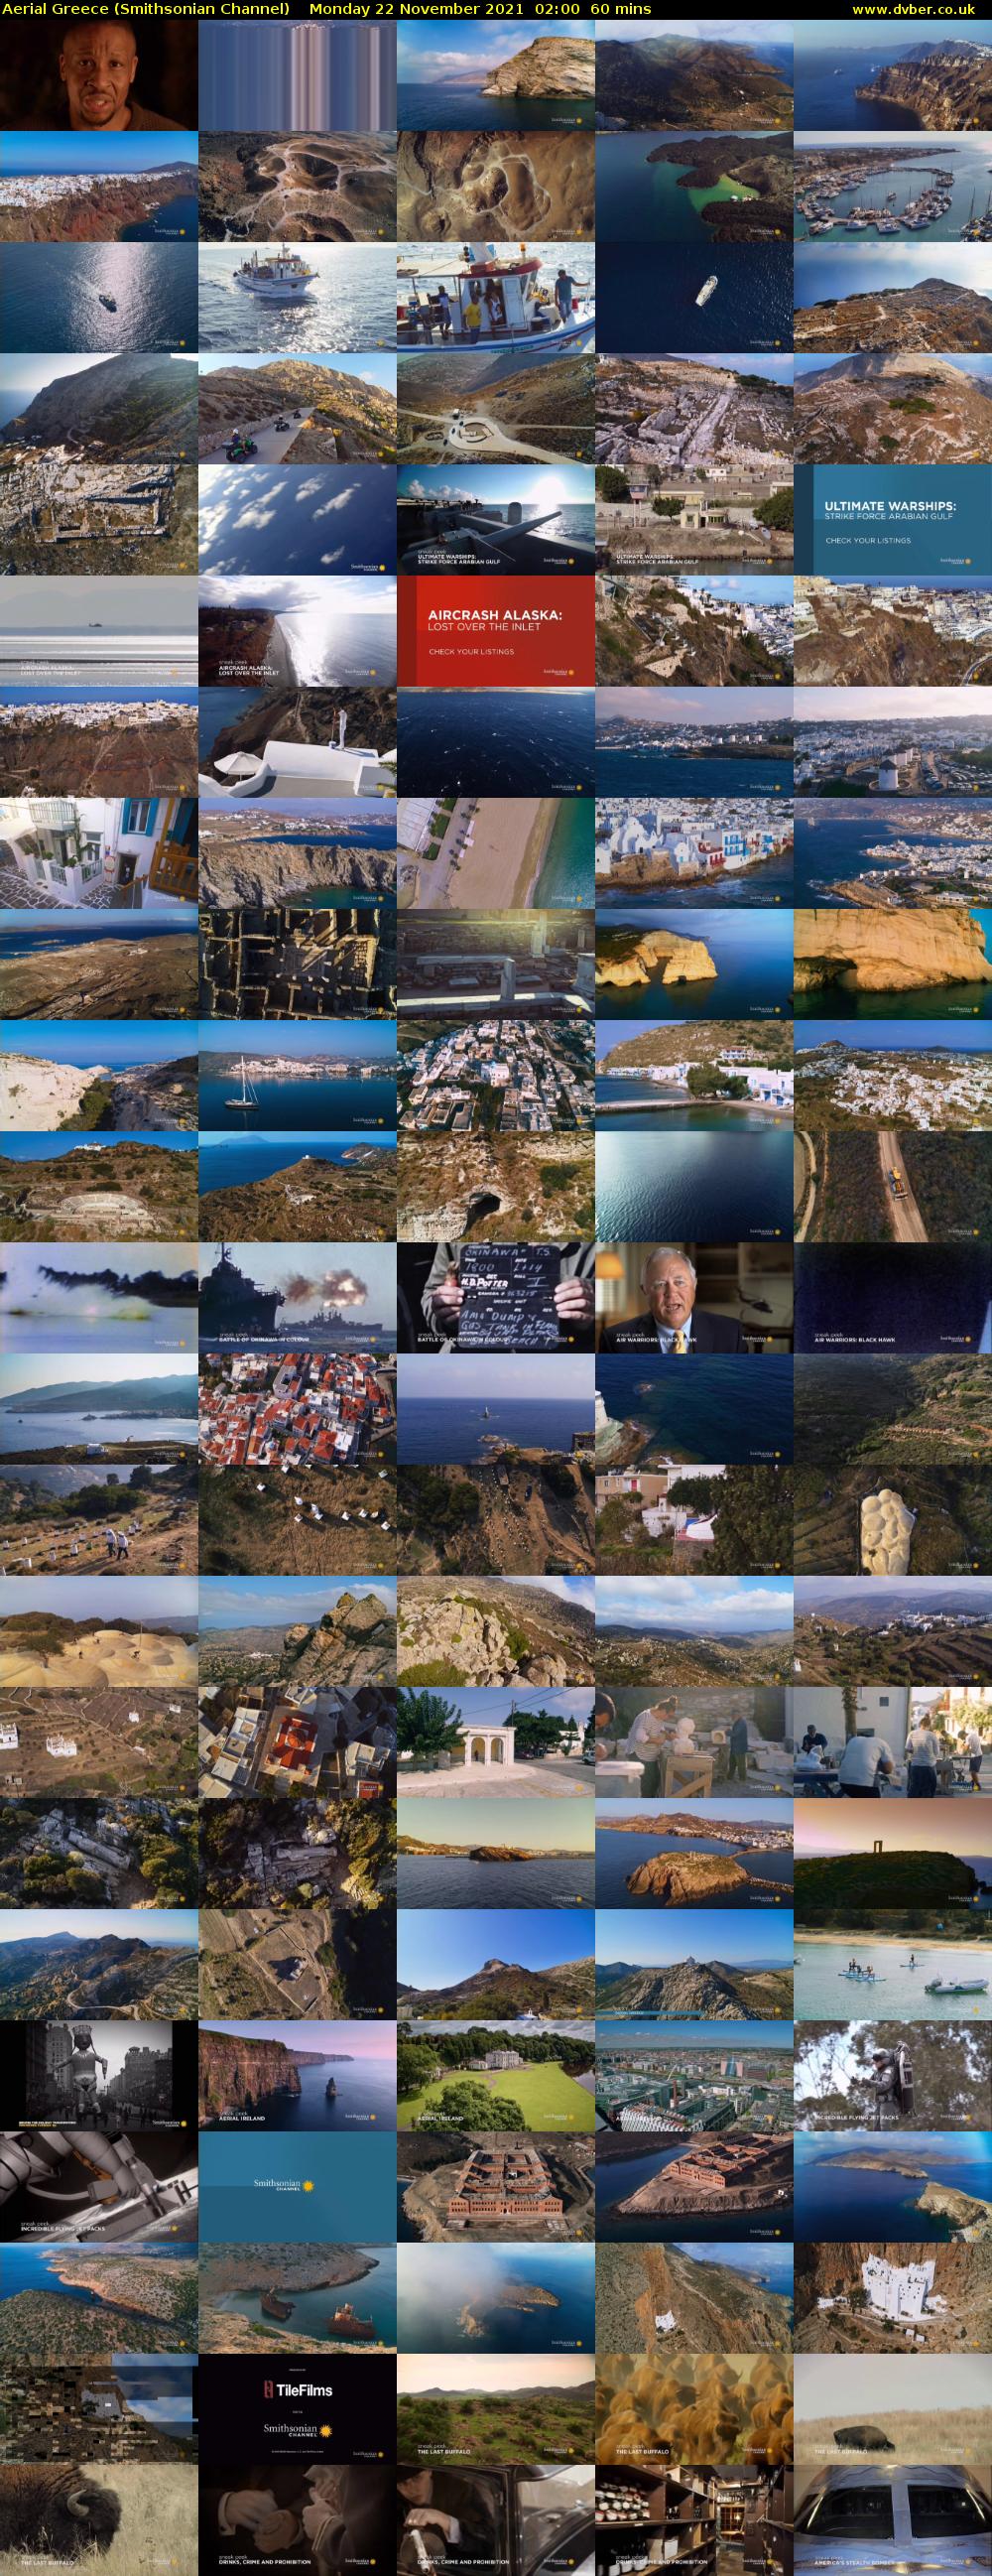 Aerial Greece (Smithsonian Channel) Monday 22 November 2021 02:00 - 03:00